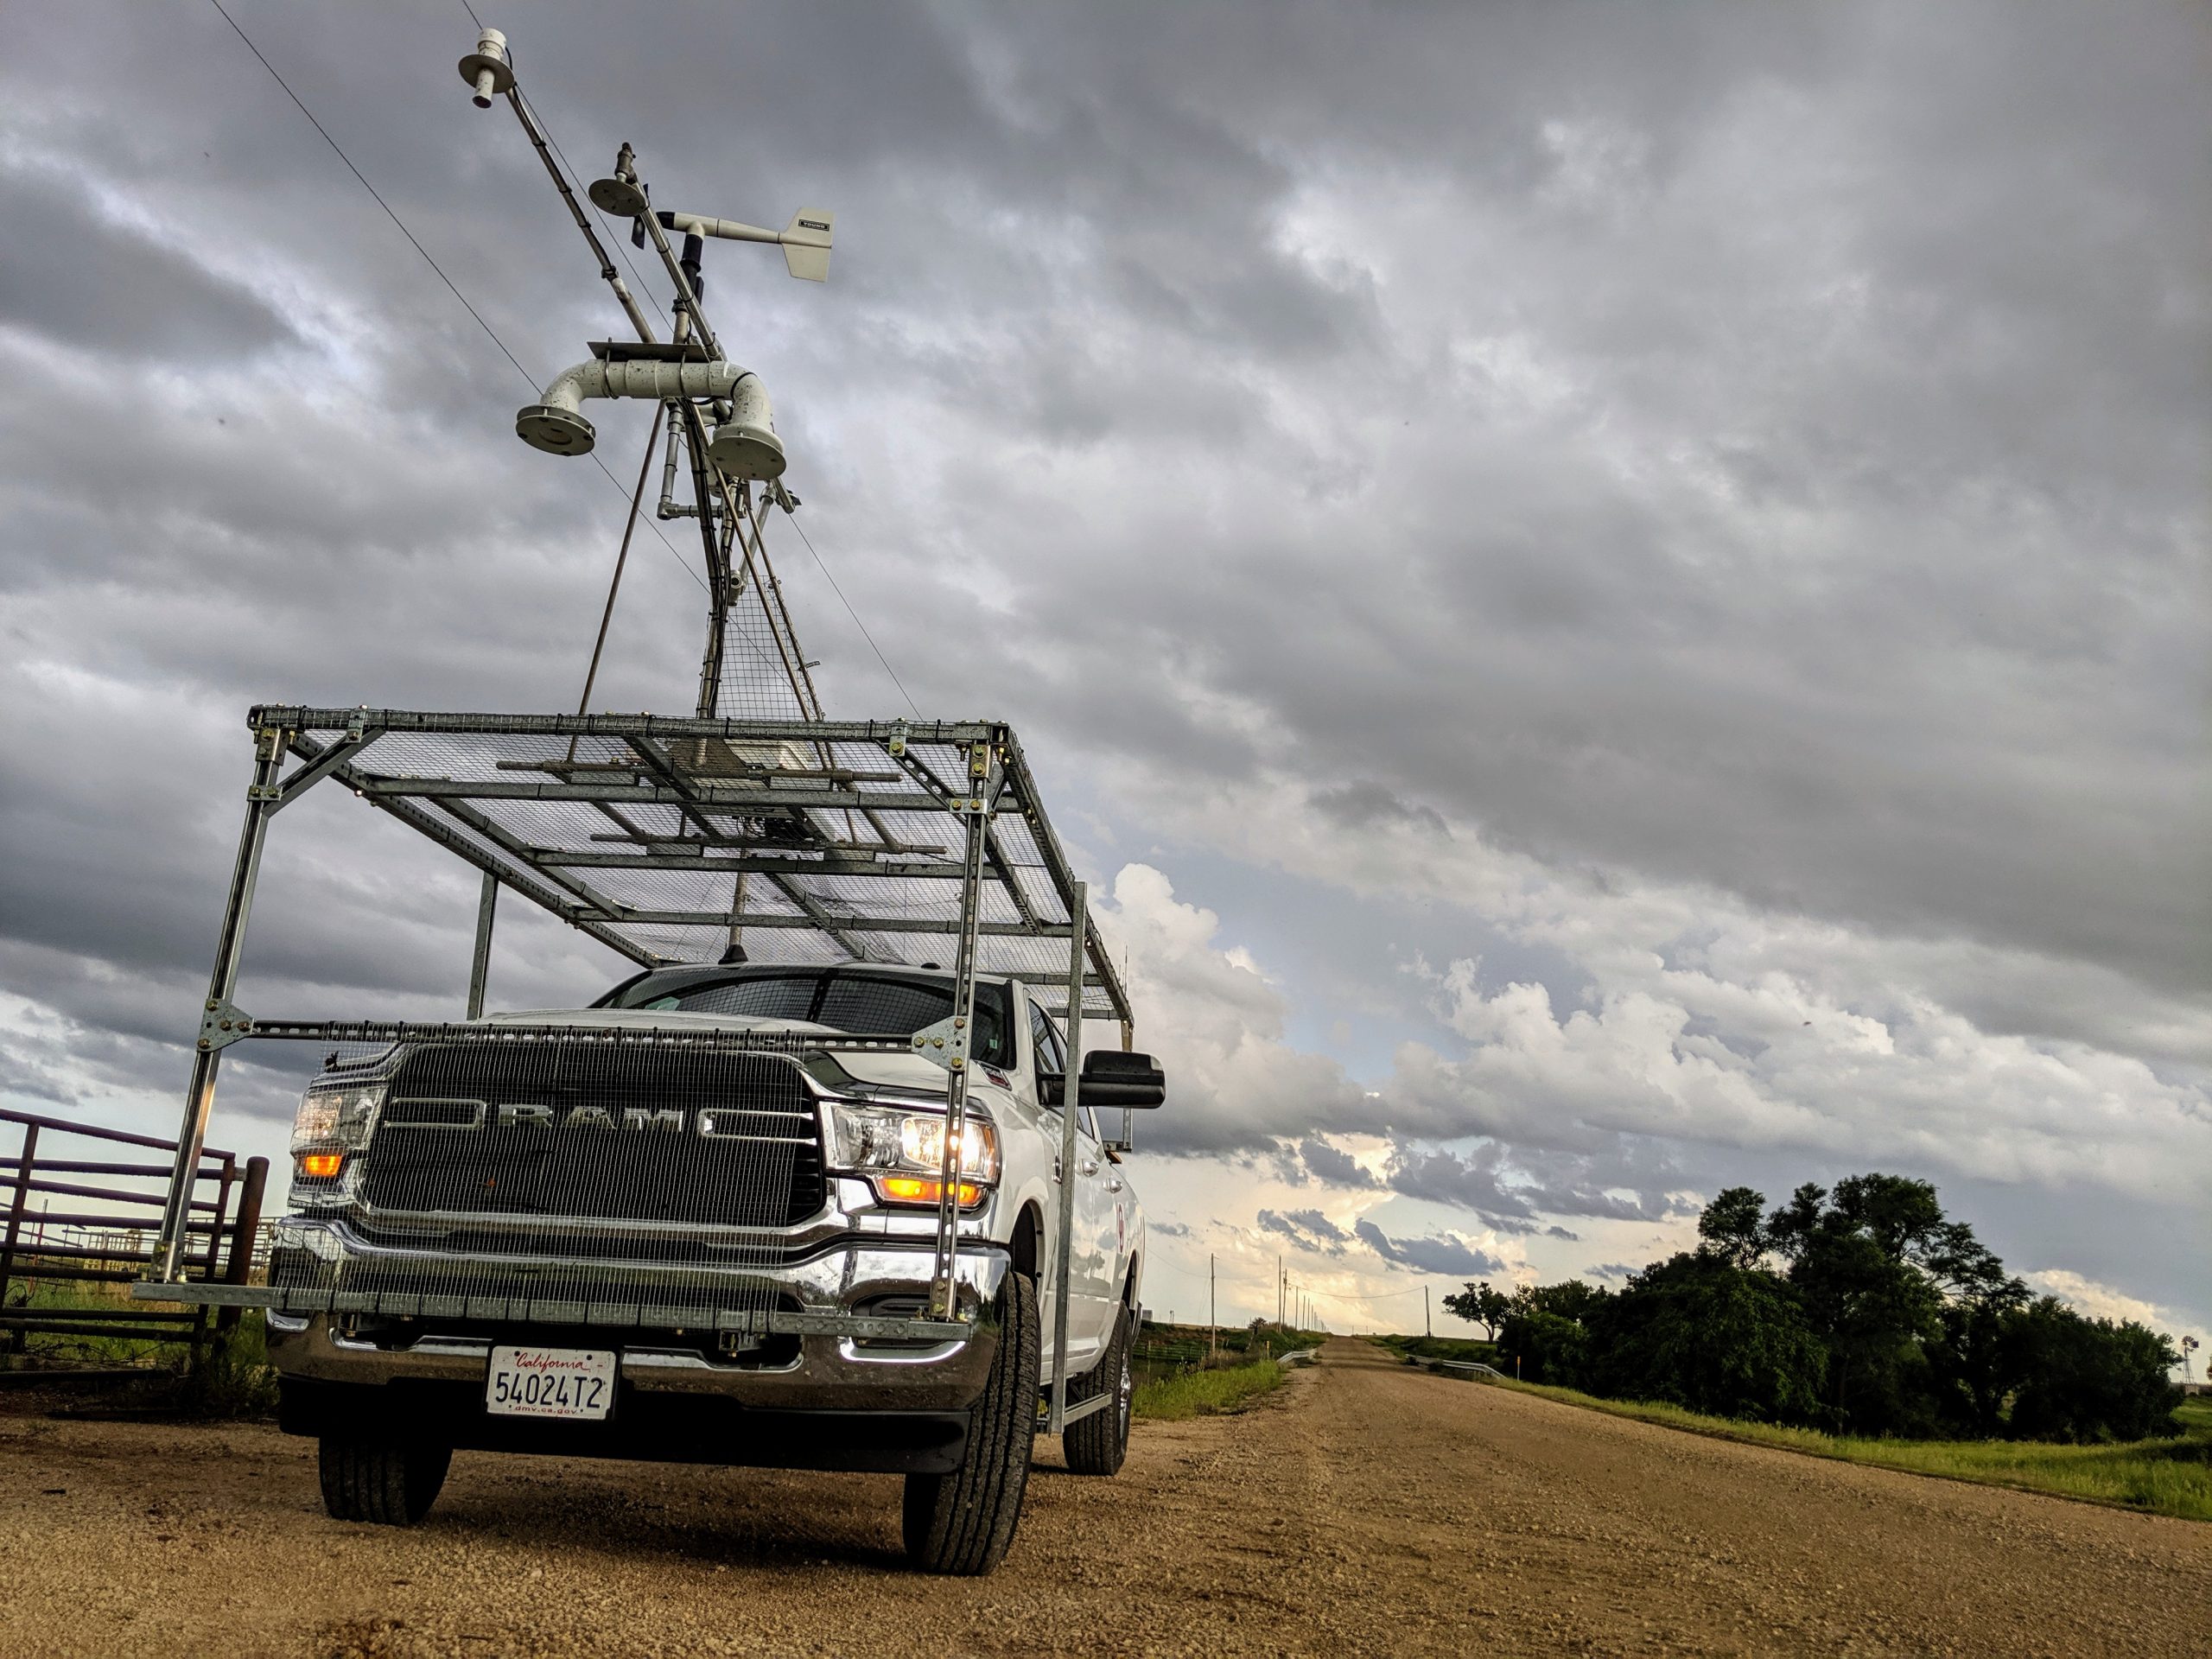 A truck with weather instruments attached on the top.